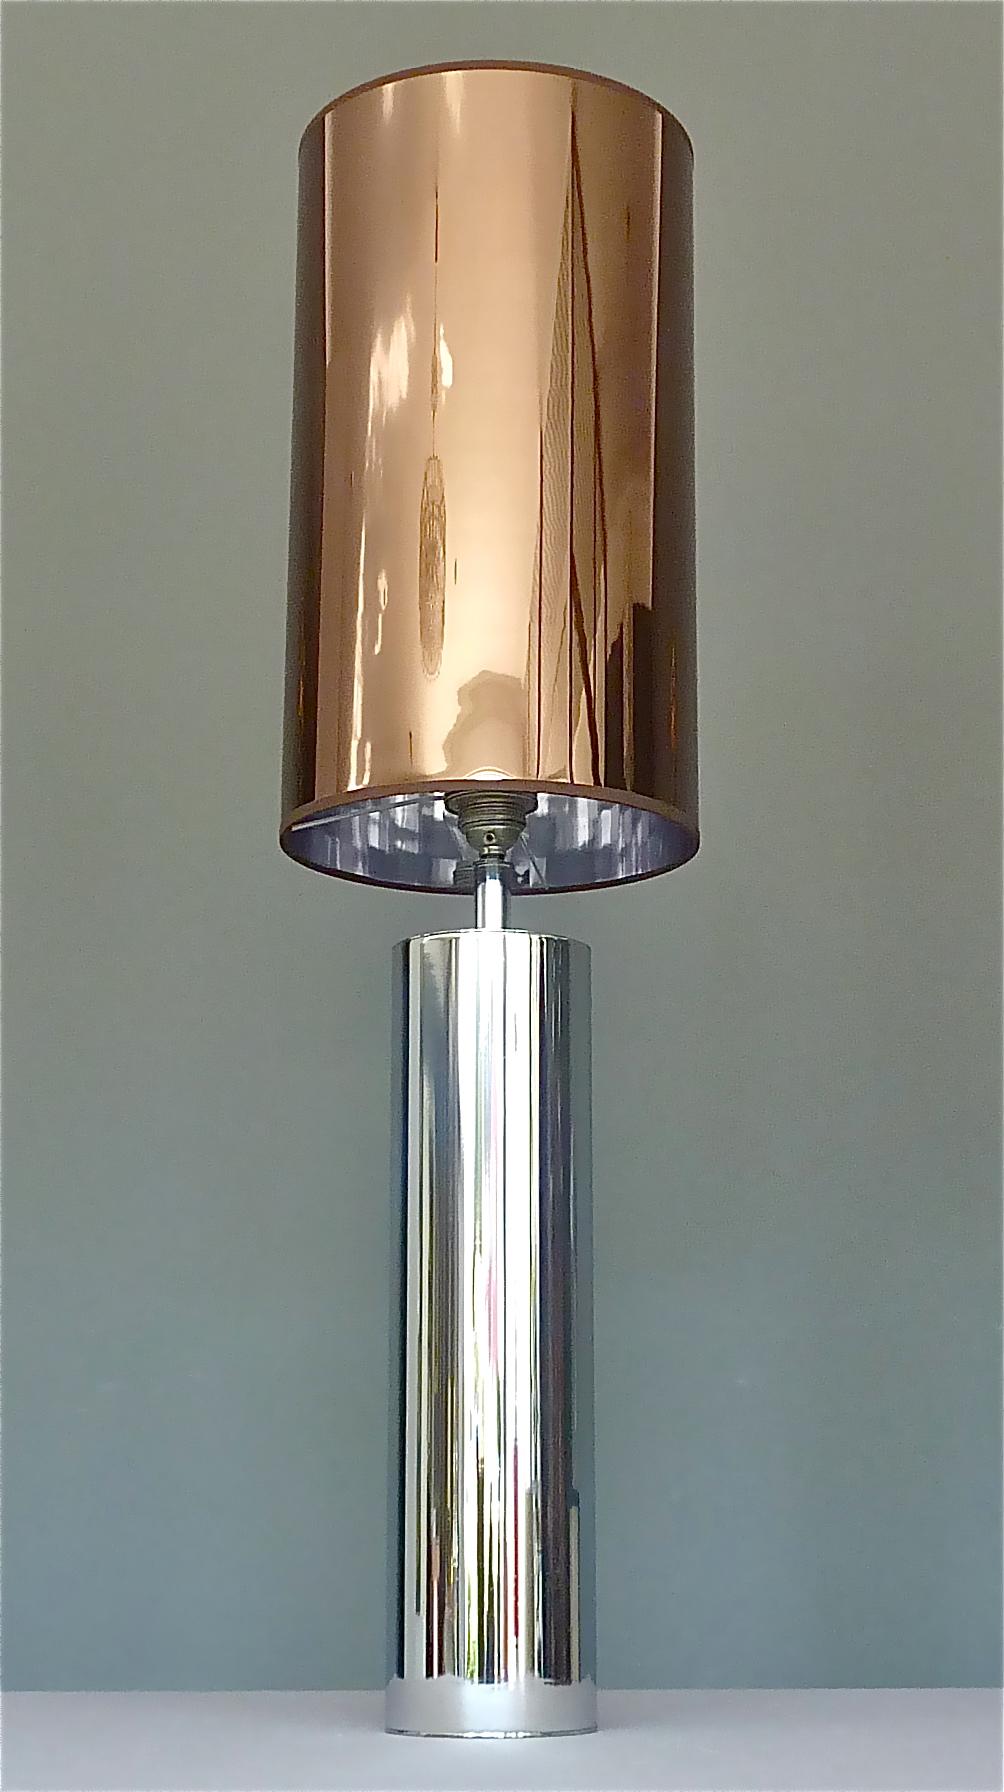 Monumentale Chromstahl Tischlampe Willy Rizzo Cardin Style Bronze Spiegel 1970er (Space Age) im Angebot